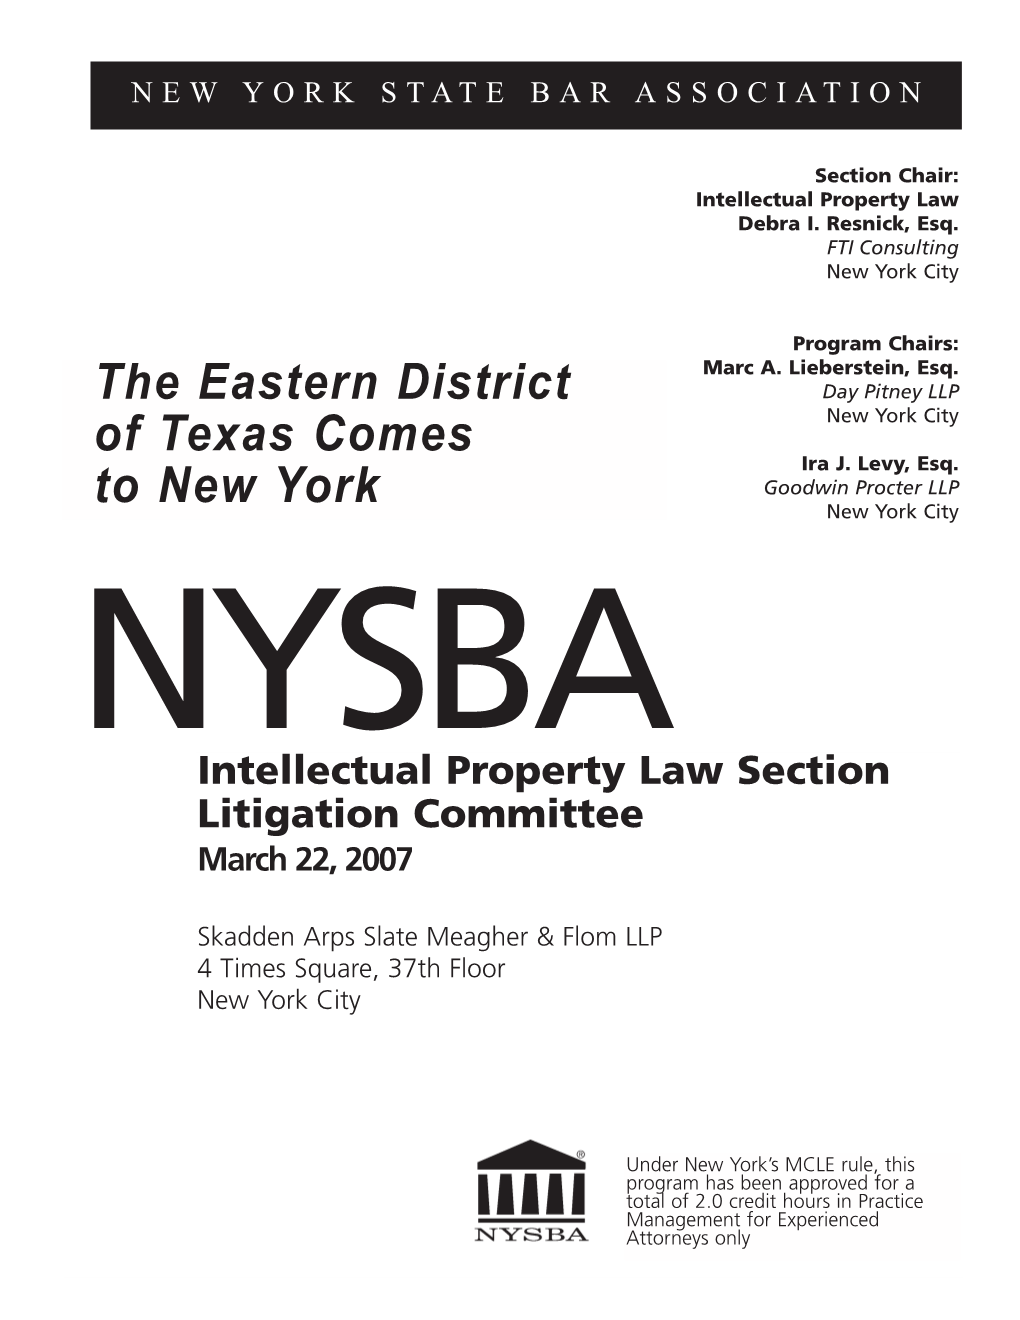 The Eastern District of Texas Comes to New York